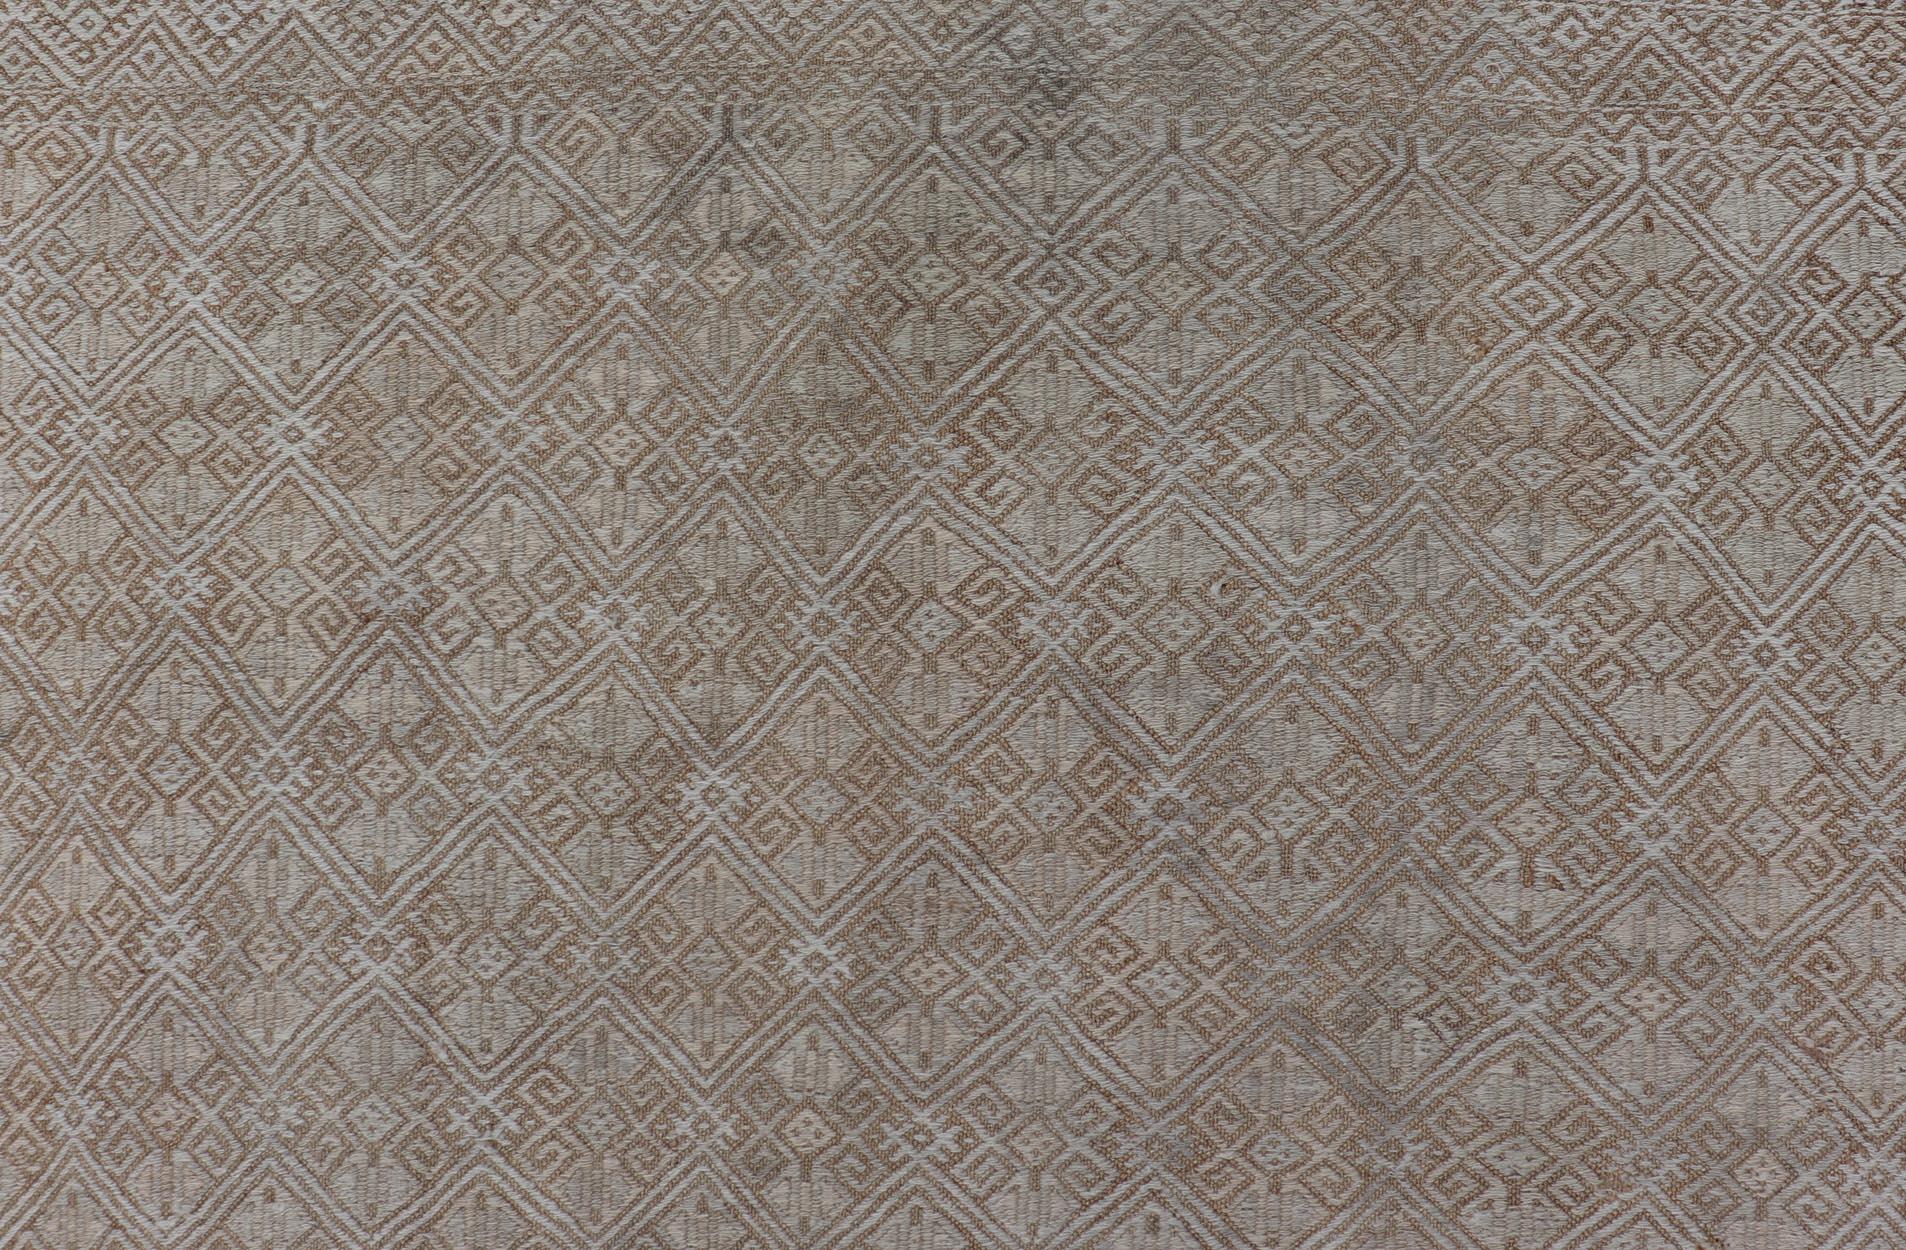 Hand-Woven All-Over Design Turkish Vintage Kilim Rug in Tan, Taupe and Earth Tones For Sale